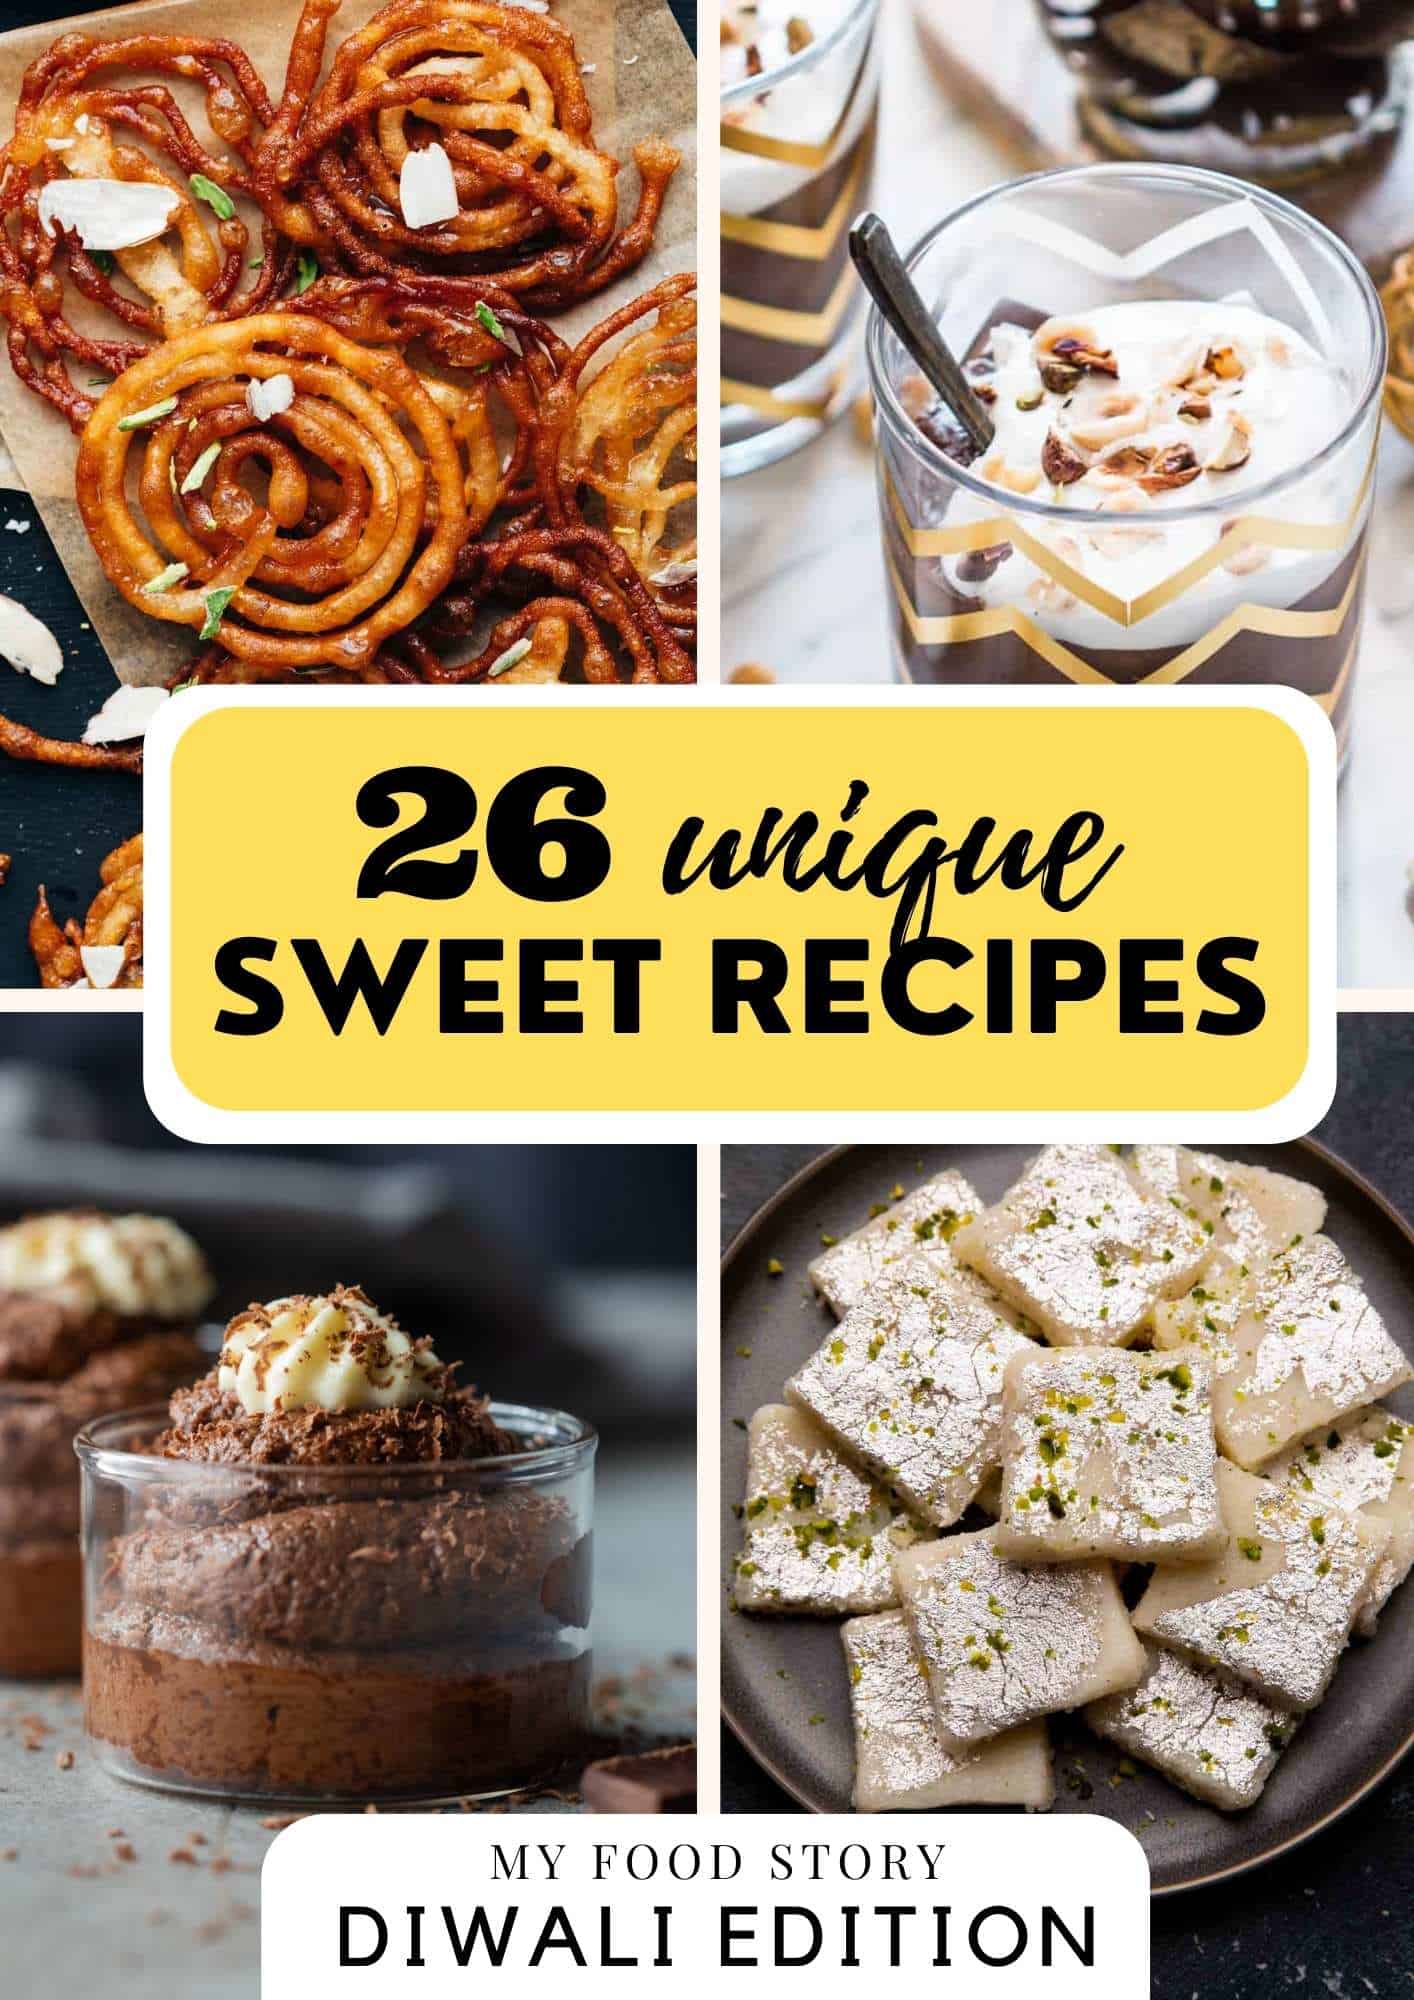 Picture collage showing four sweet recipes photographs with text overlay